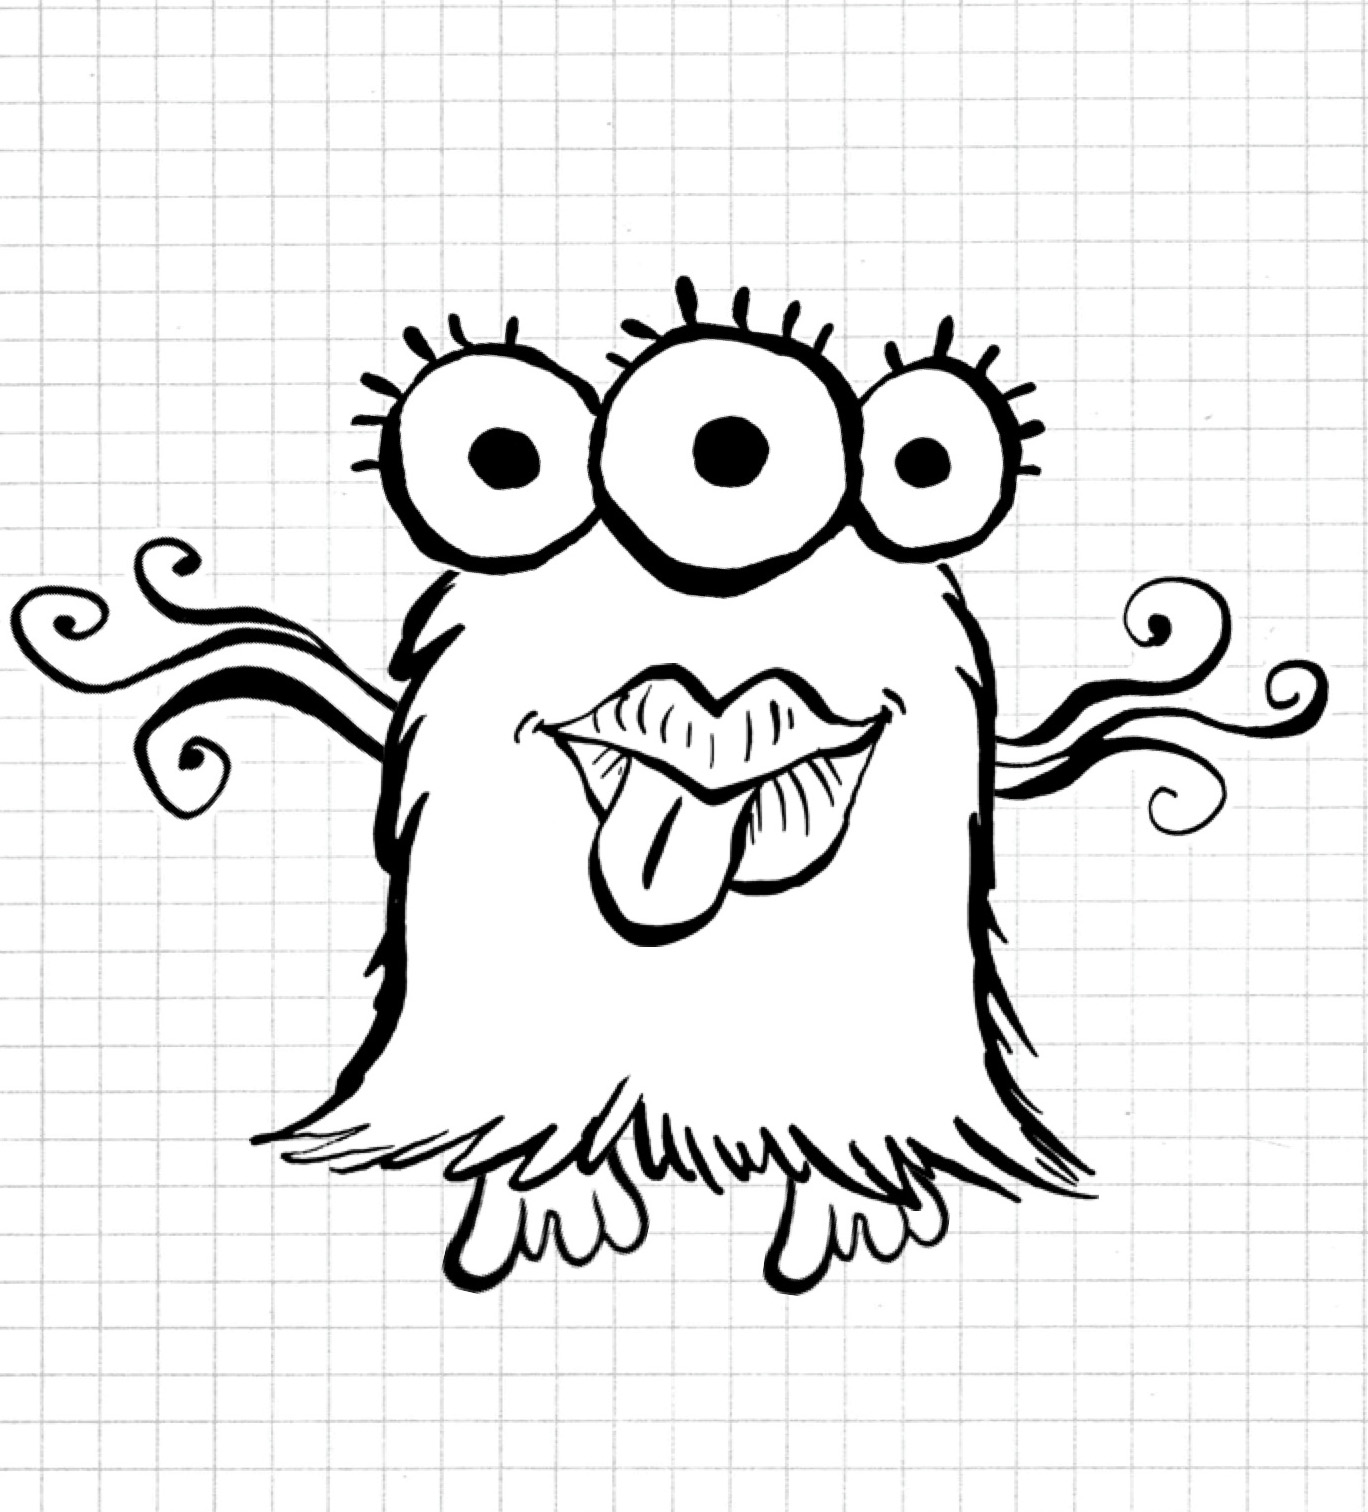 easy doodle monster